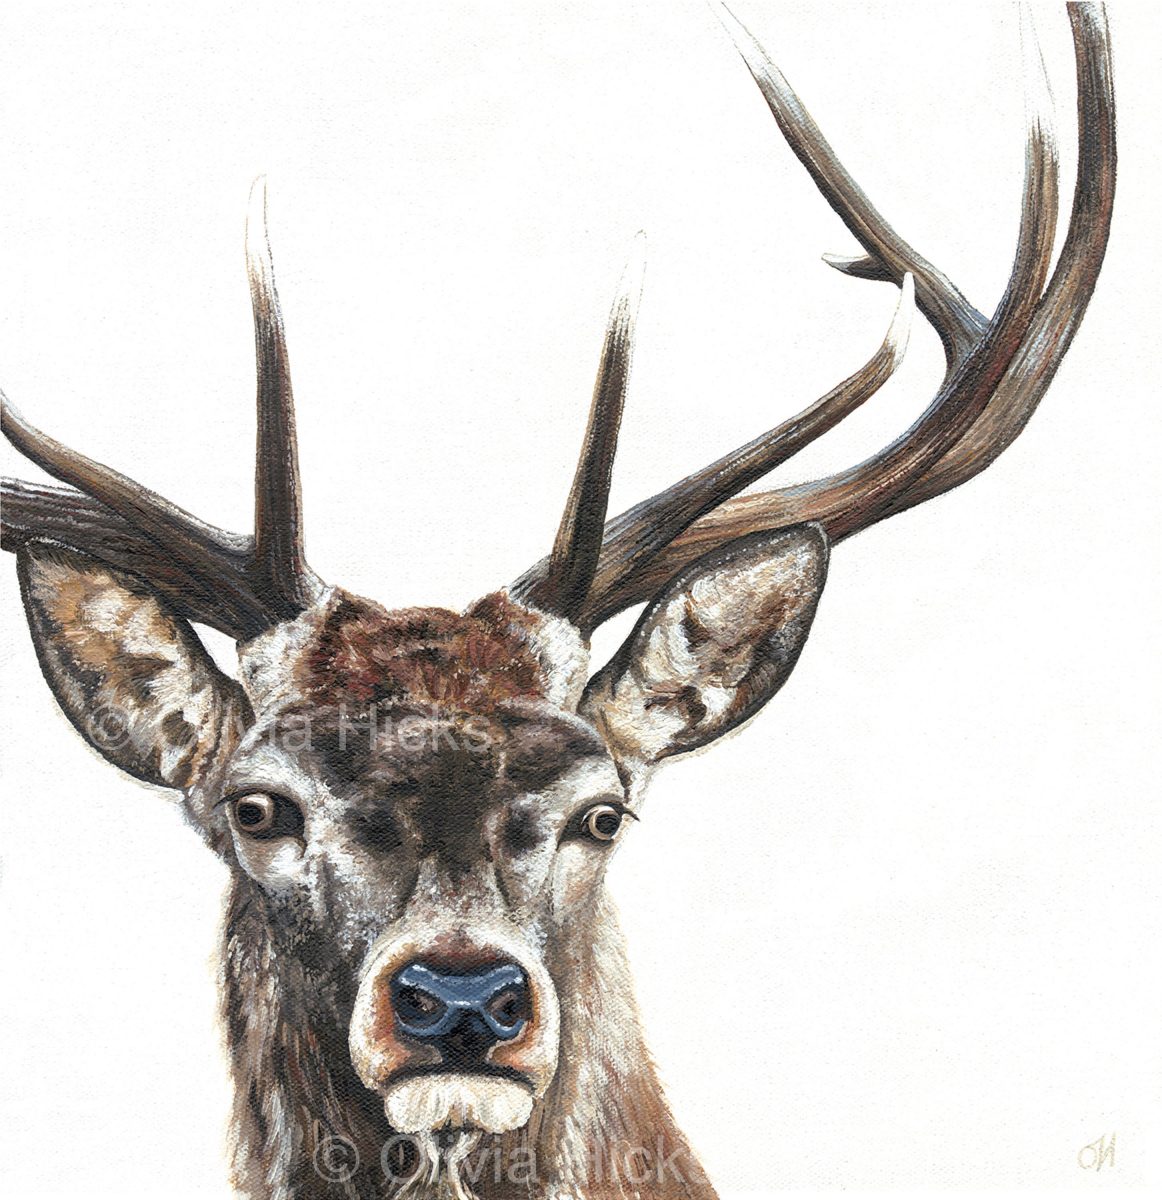 Stag - limited edition giclée canvas print